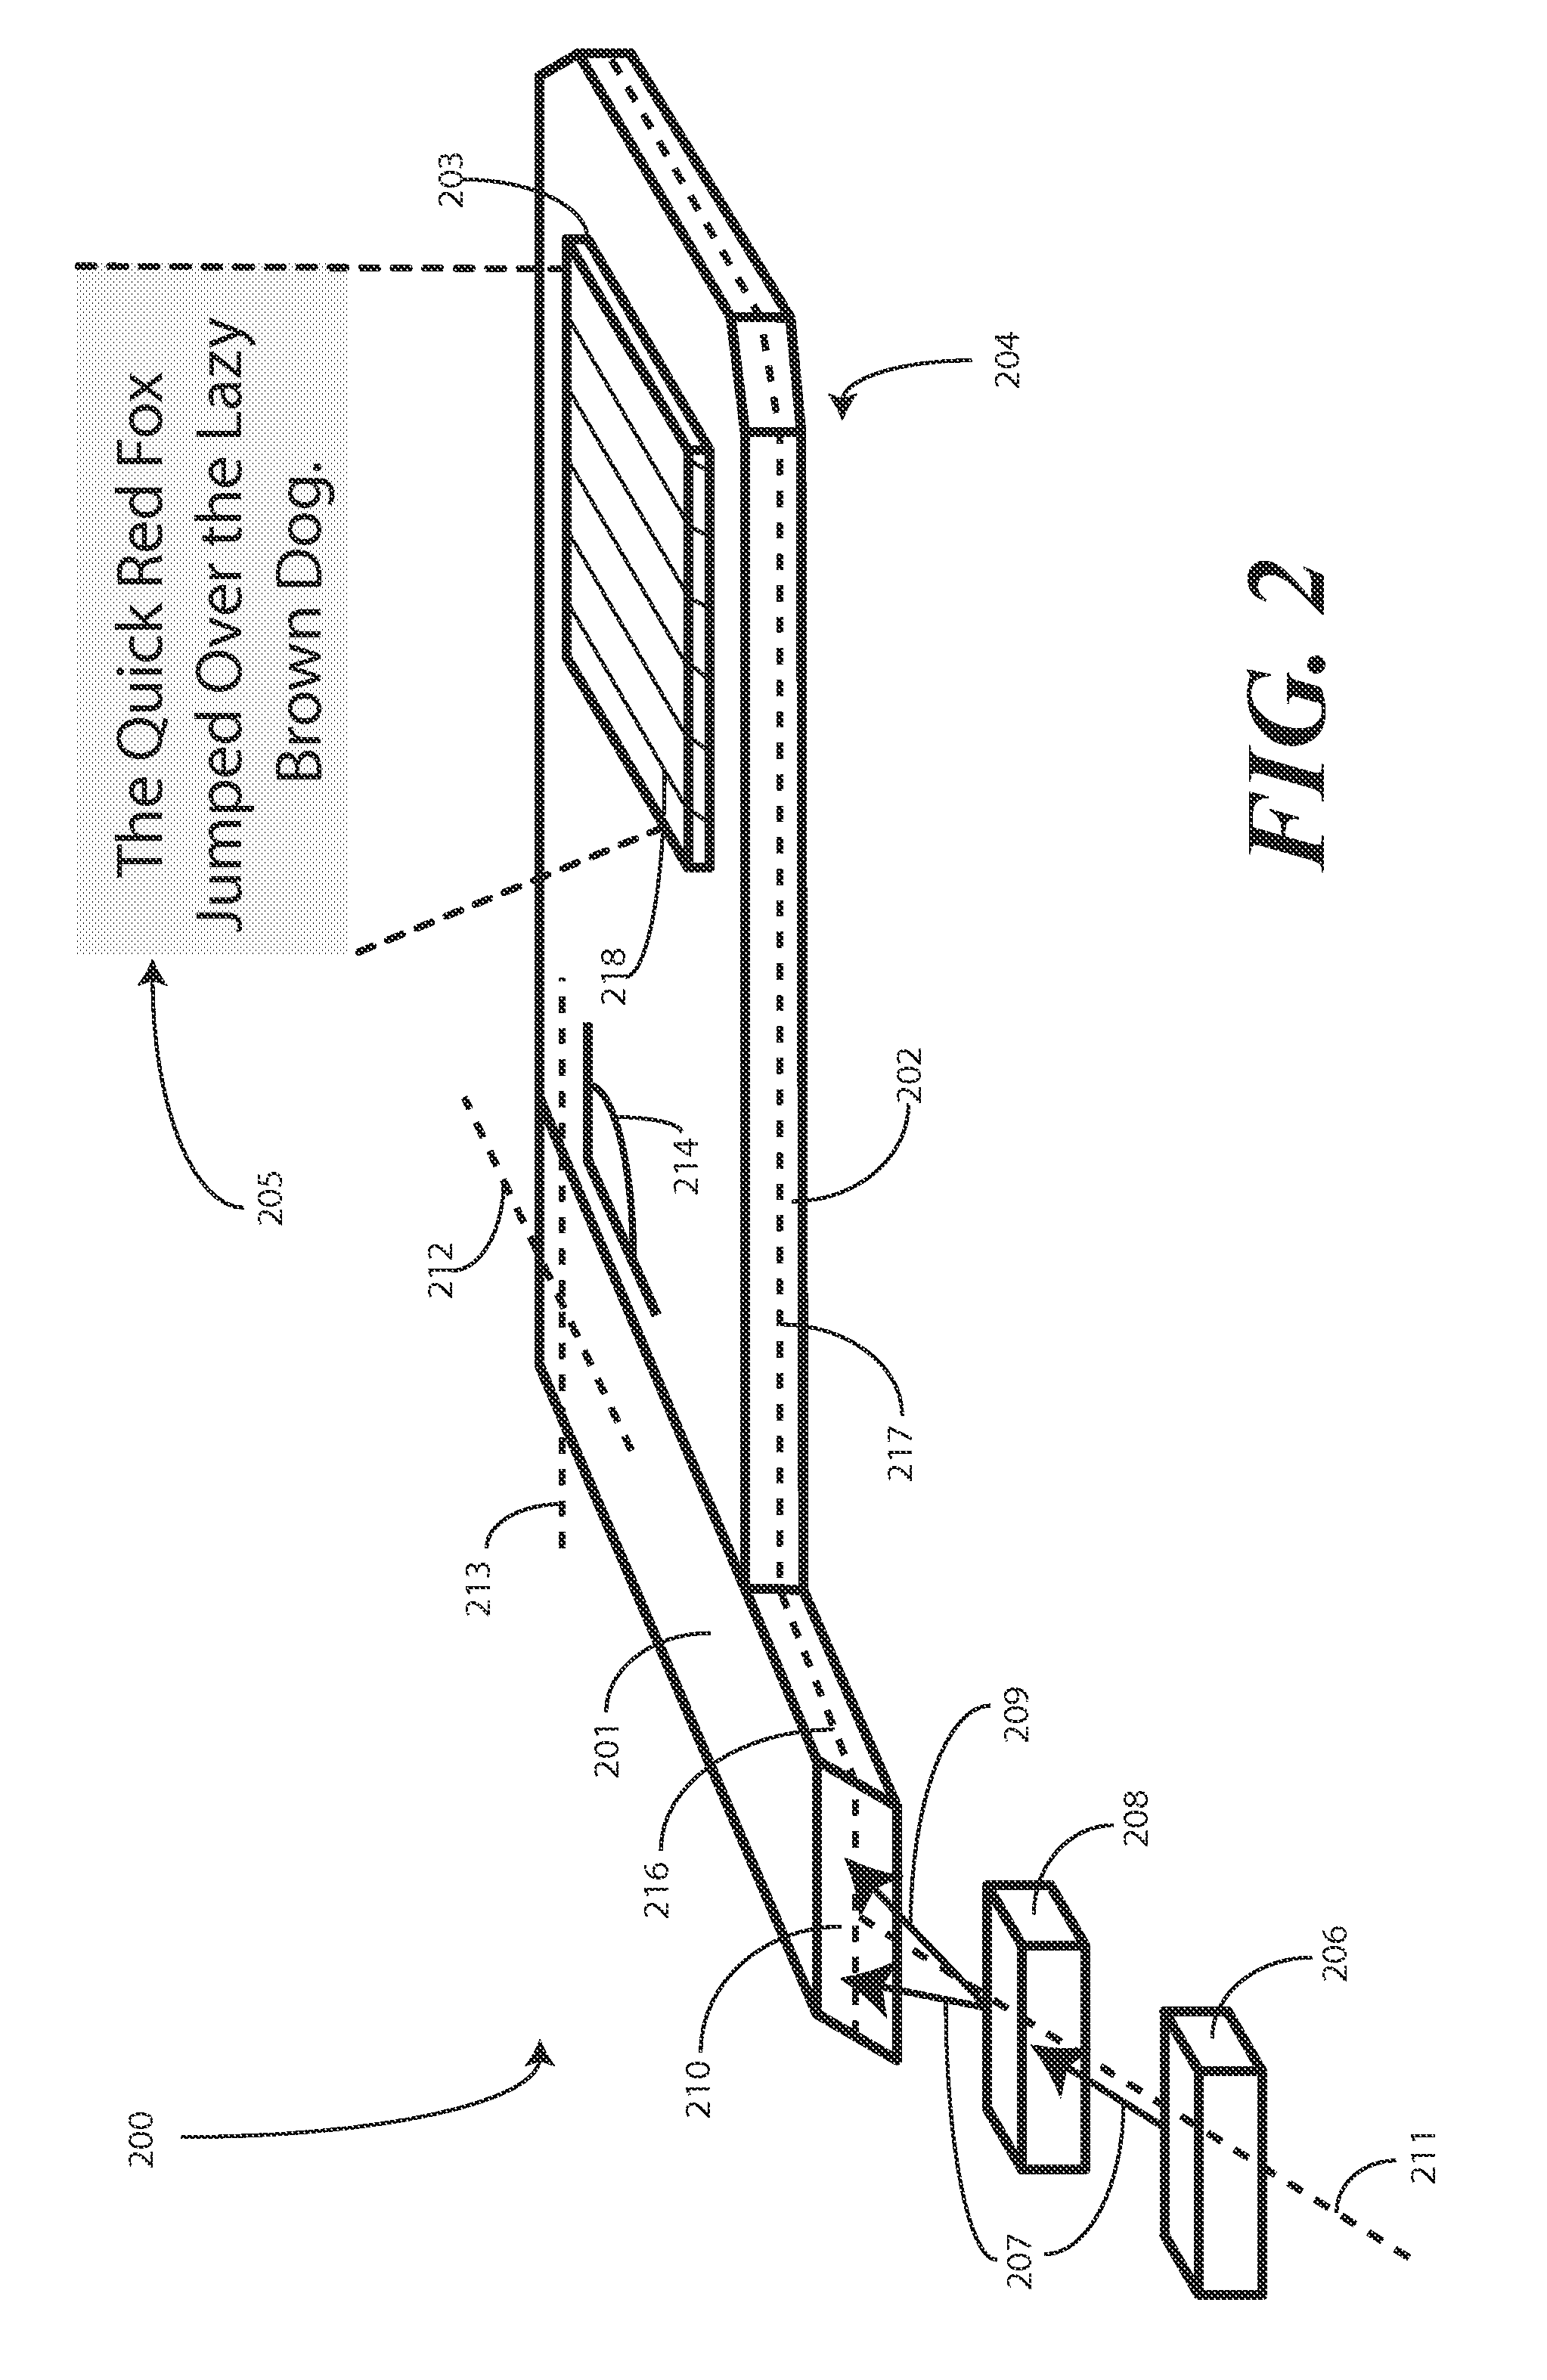 Substrate guided relay with homogenizing input relay